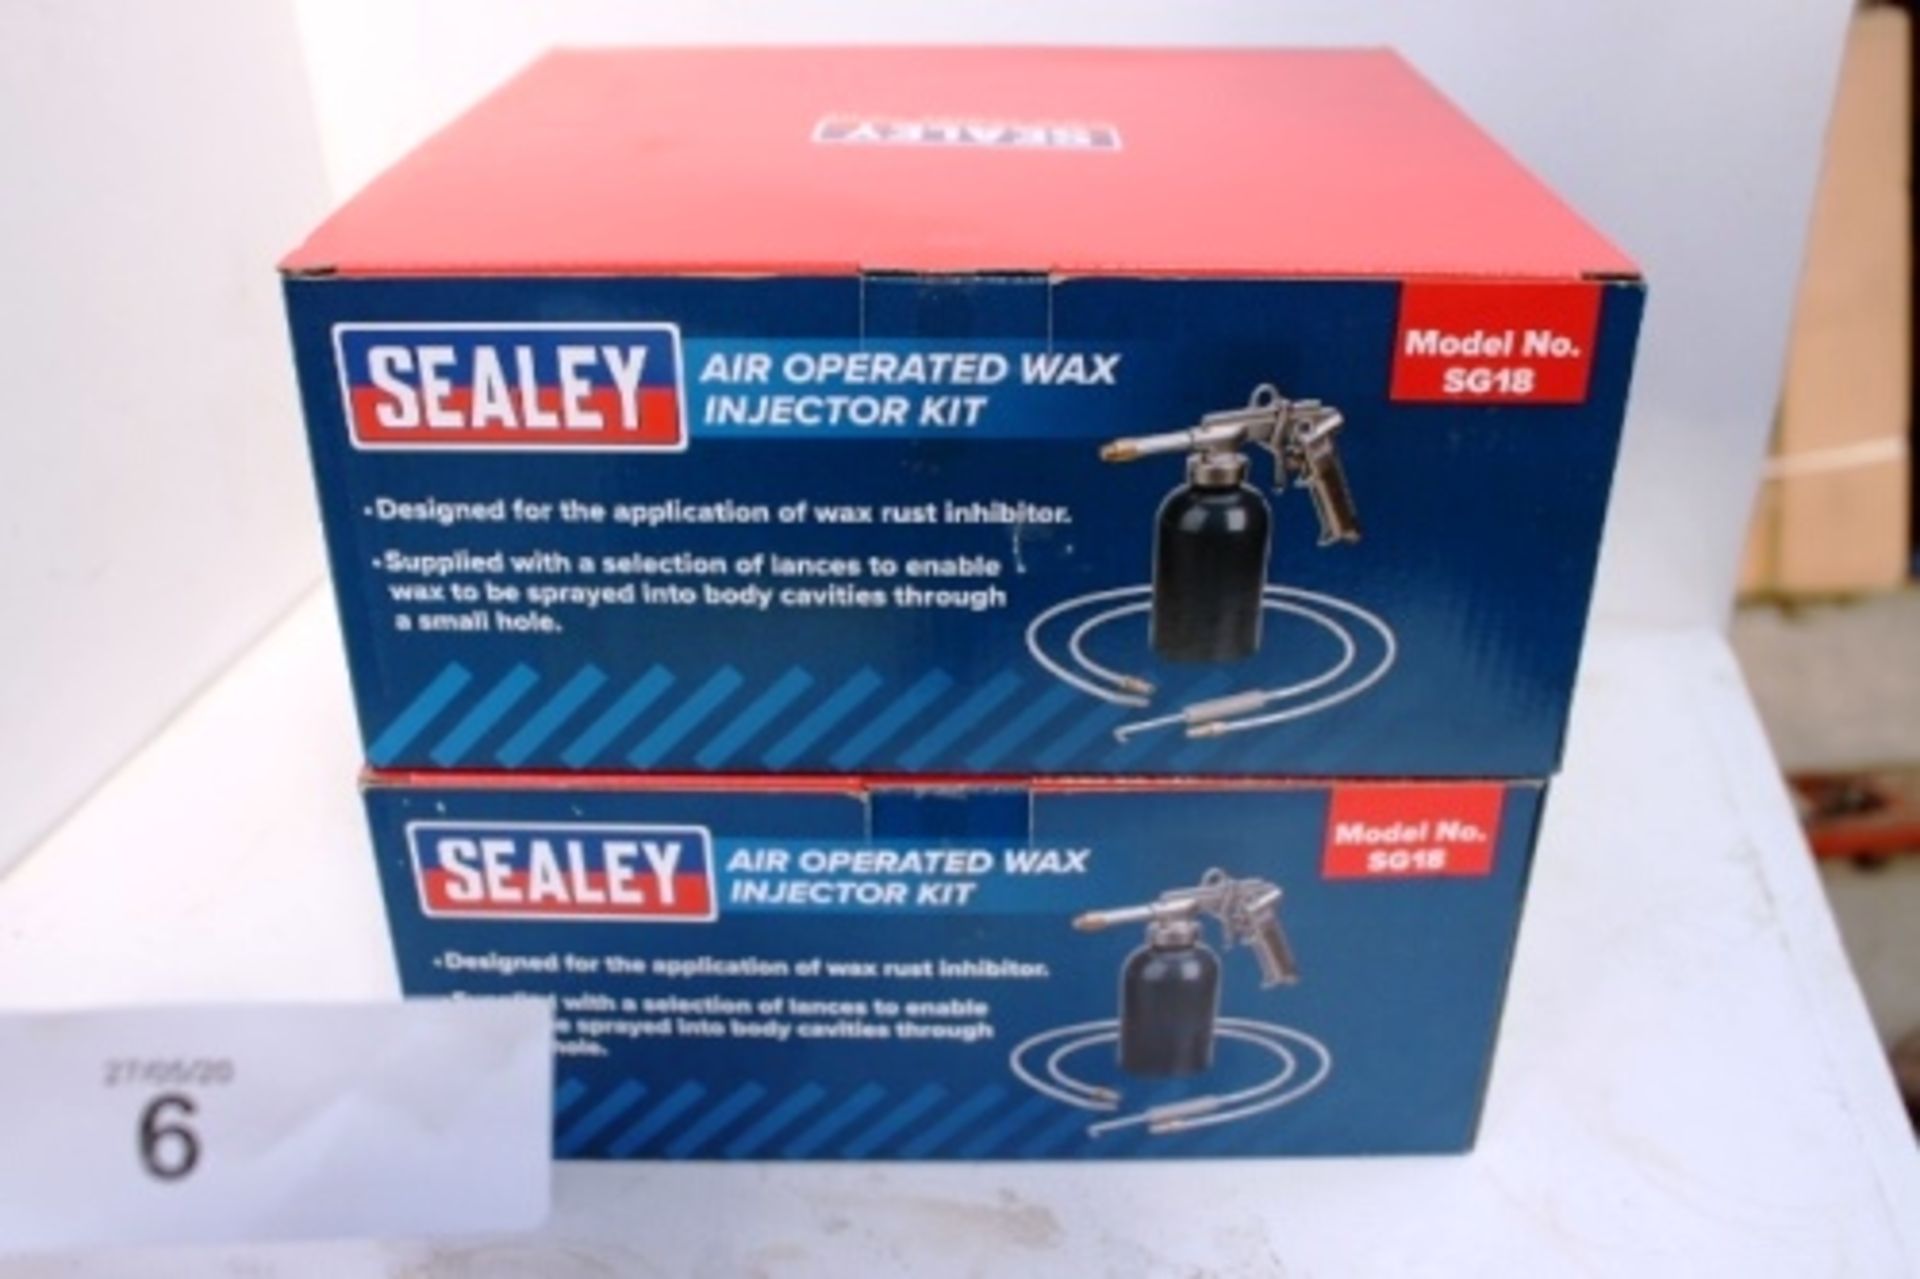 2 x Sealey air operated wax injector kits, model SG18, RRP £80.00 each - New (TC1)